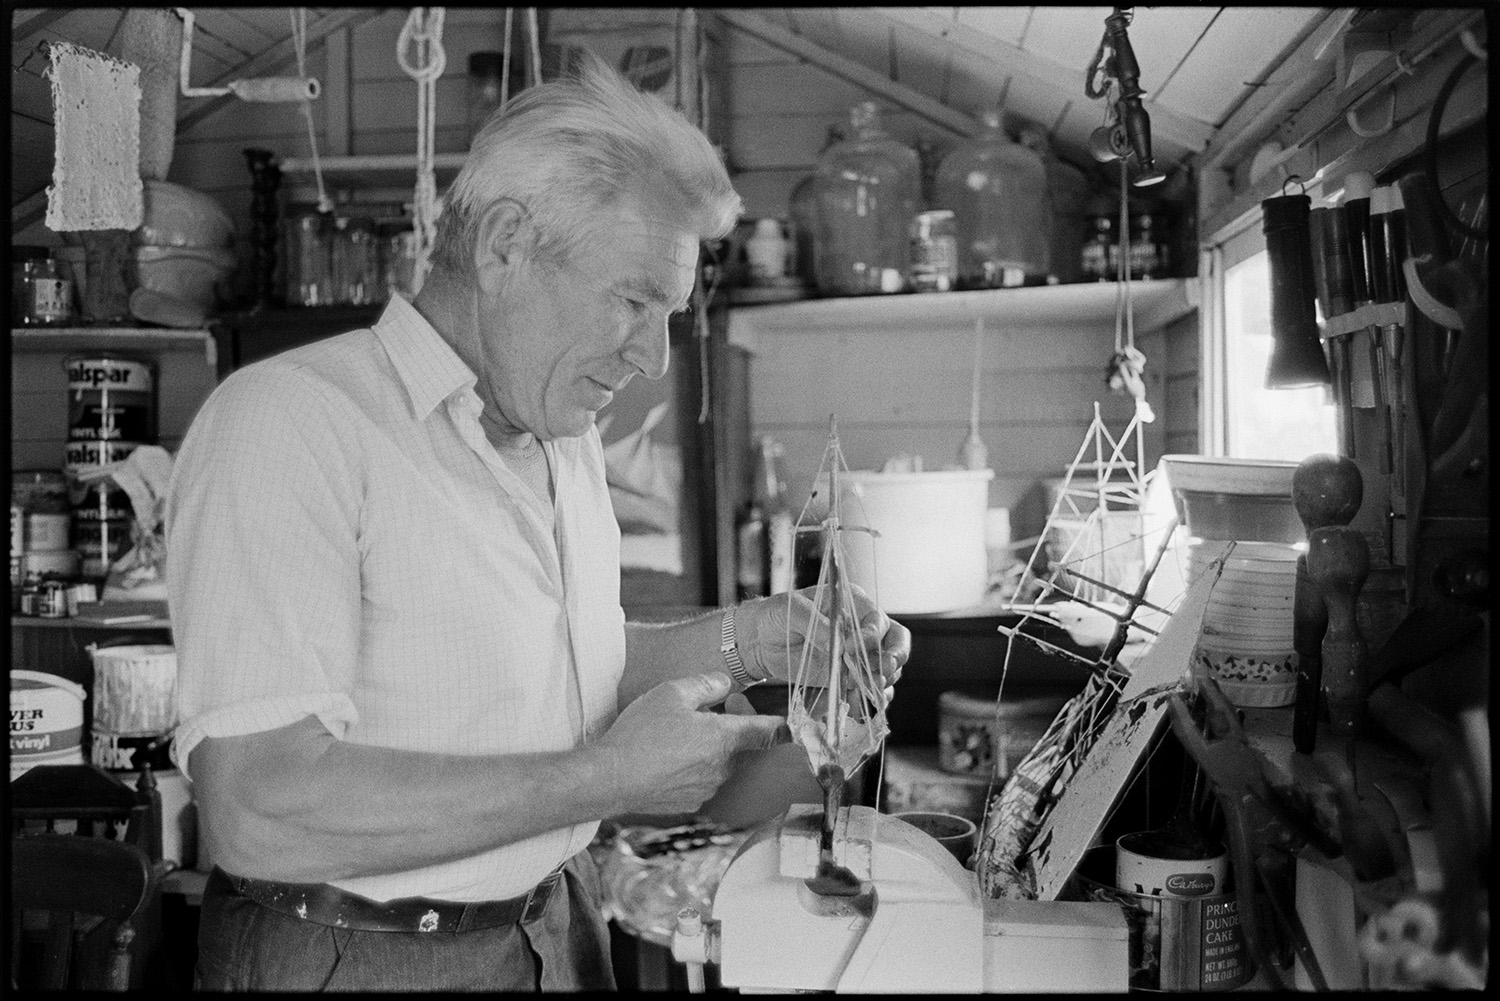 Retired sailor and wife, posing and workshop with model ships. 
[A retired sailor working on a model ship in his workshop at Braunton.  Parts of models, paint tins and glass jars can be seen in the background.]